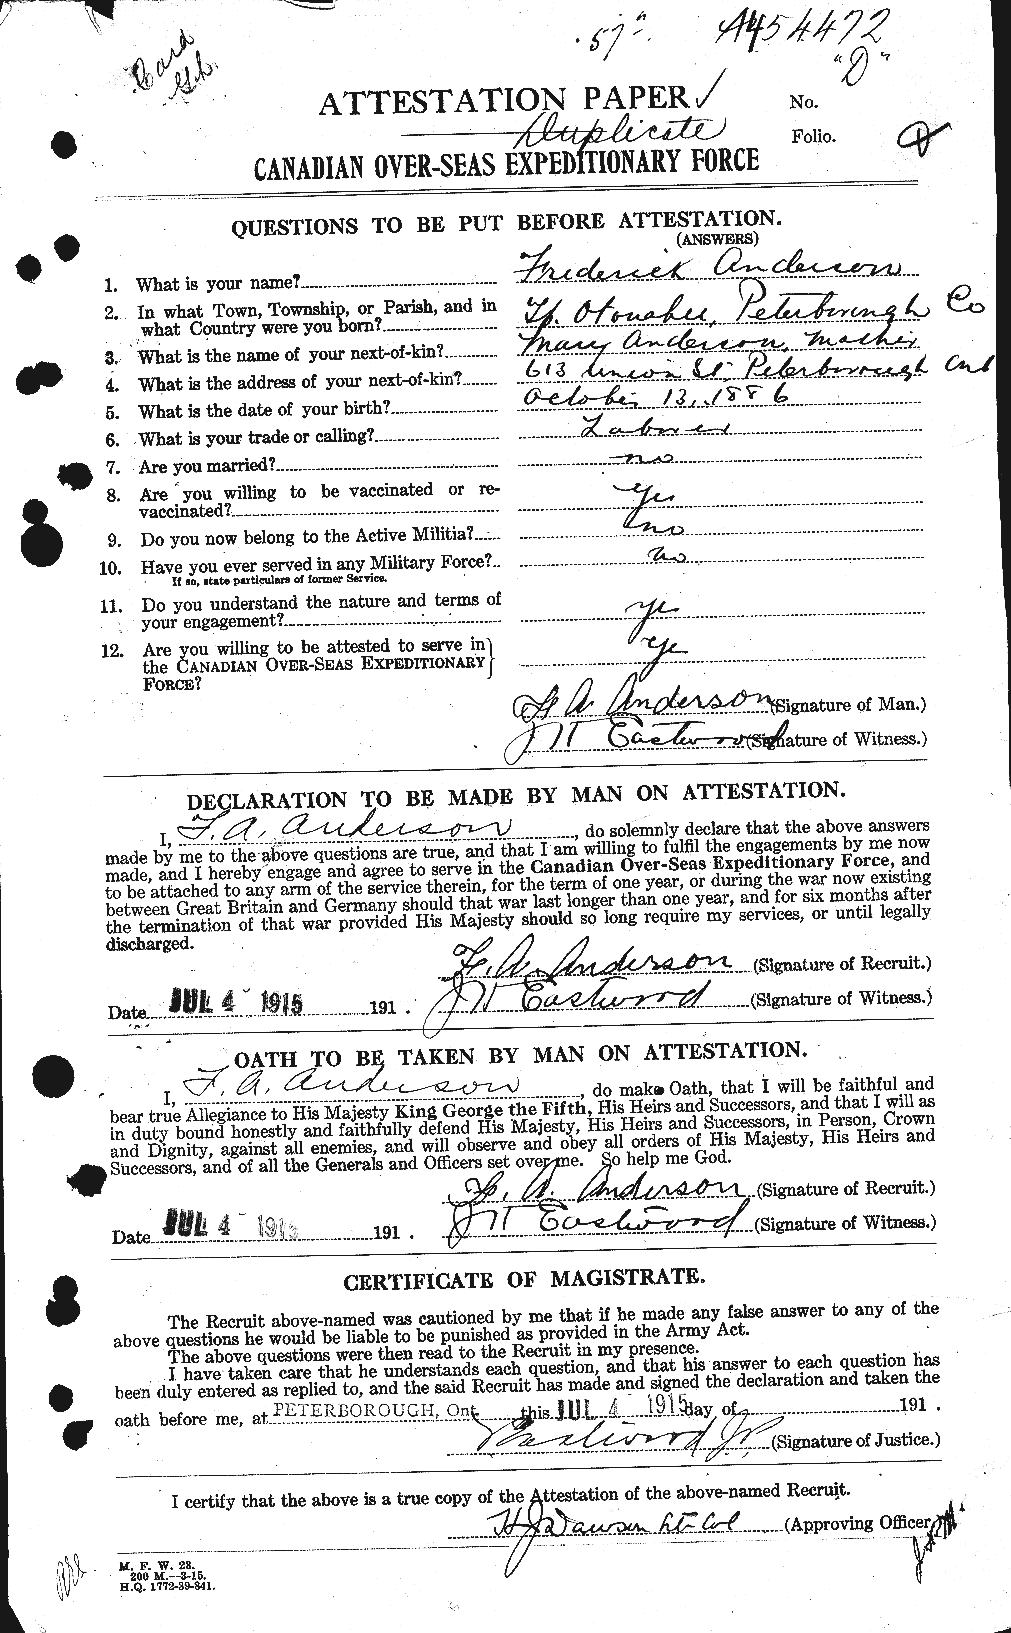 Personnel Records of the First World War - CEF 209827a